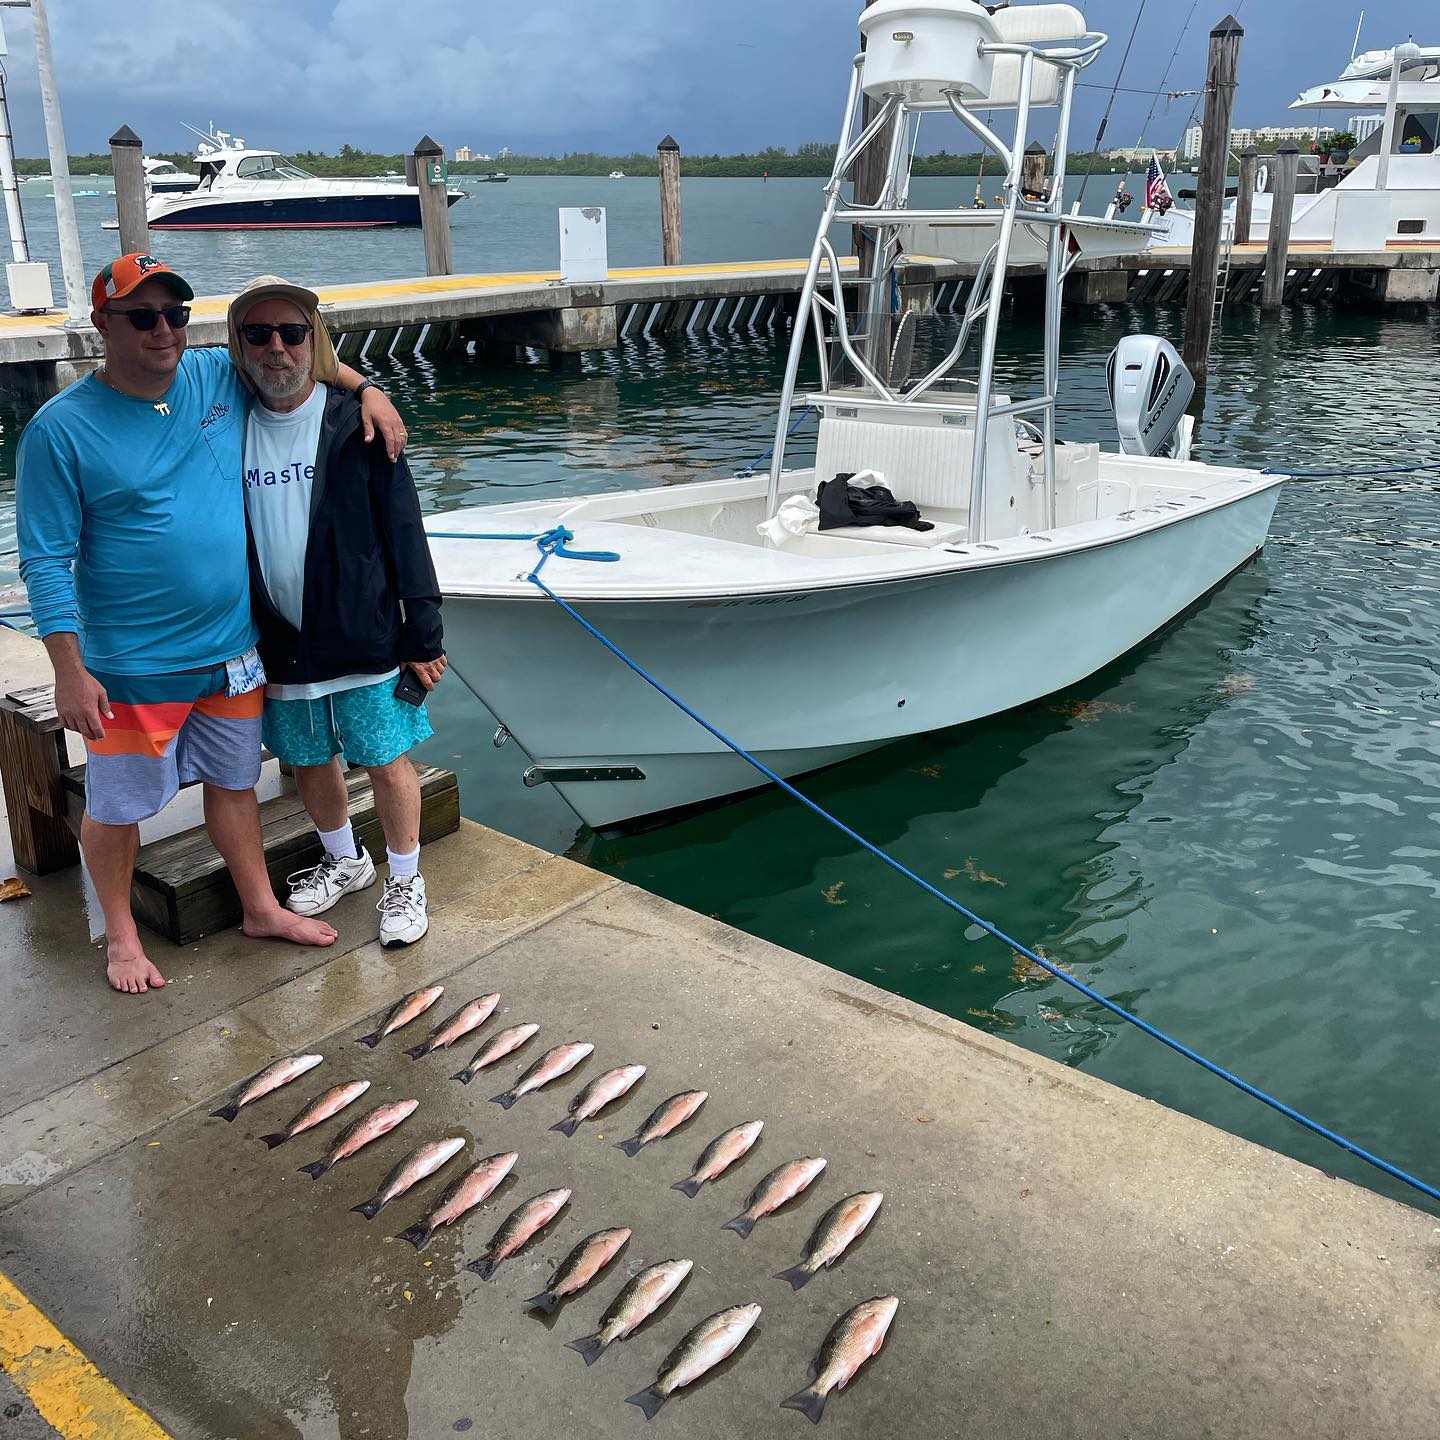 I took Adam, his Dad, his niece and nephew out this morning. Luckily Adam is a big shot accountant because he needed to keep count of our Mangrove Snappers. They had an awesome morning bending 10 lb spinning rods and in the end they had a nice pile of Snapper Nuggets for a family fish-fry. #GOHARDFISHING #MANGOS #miami #charterfishing #lighttackle @starbrite_com @pennfishing @captharrysfishingsupply